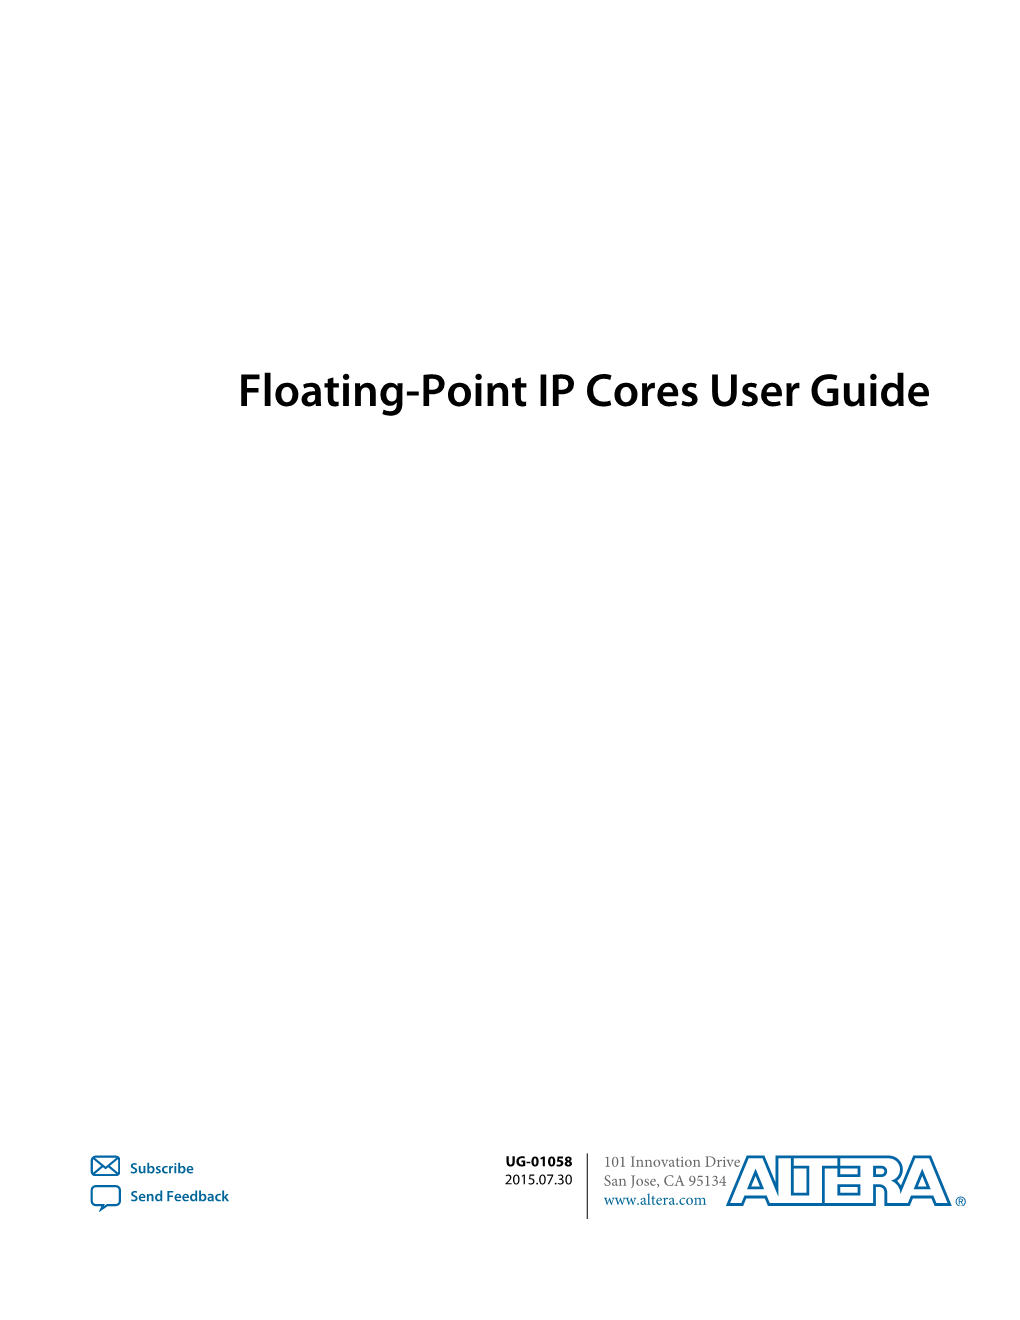 Floating-Point IP Cores User Guide